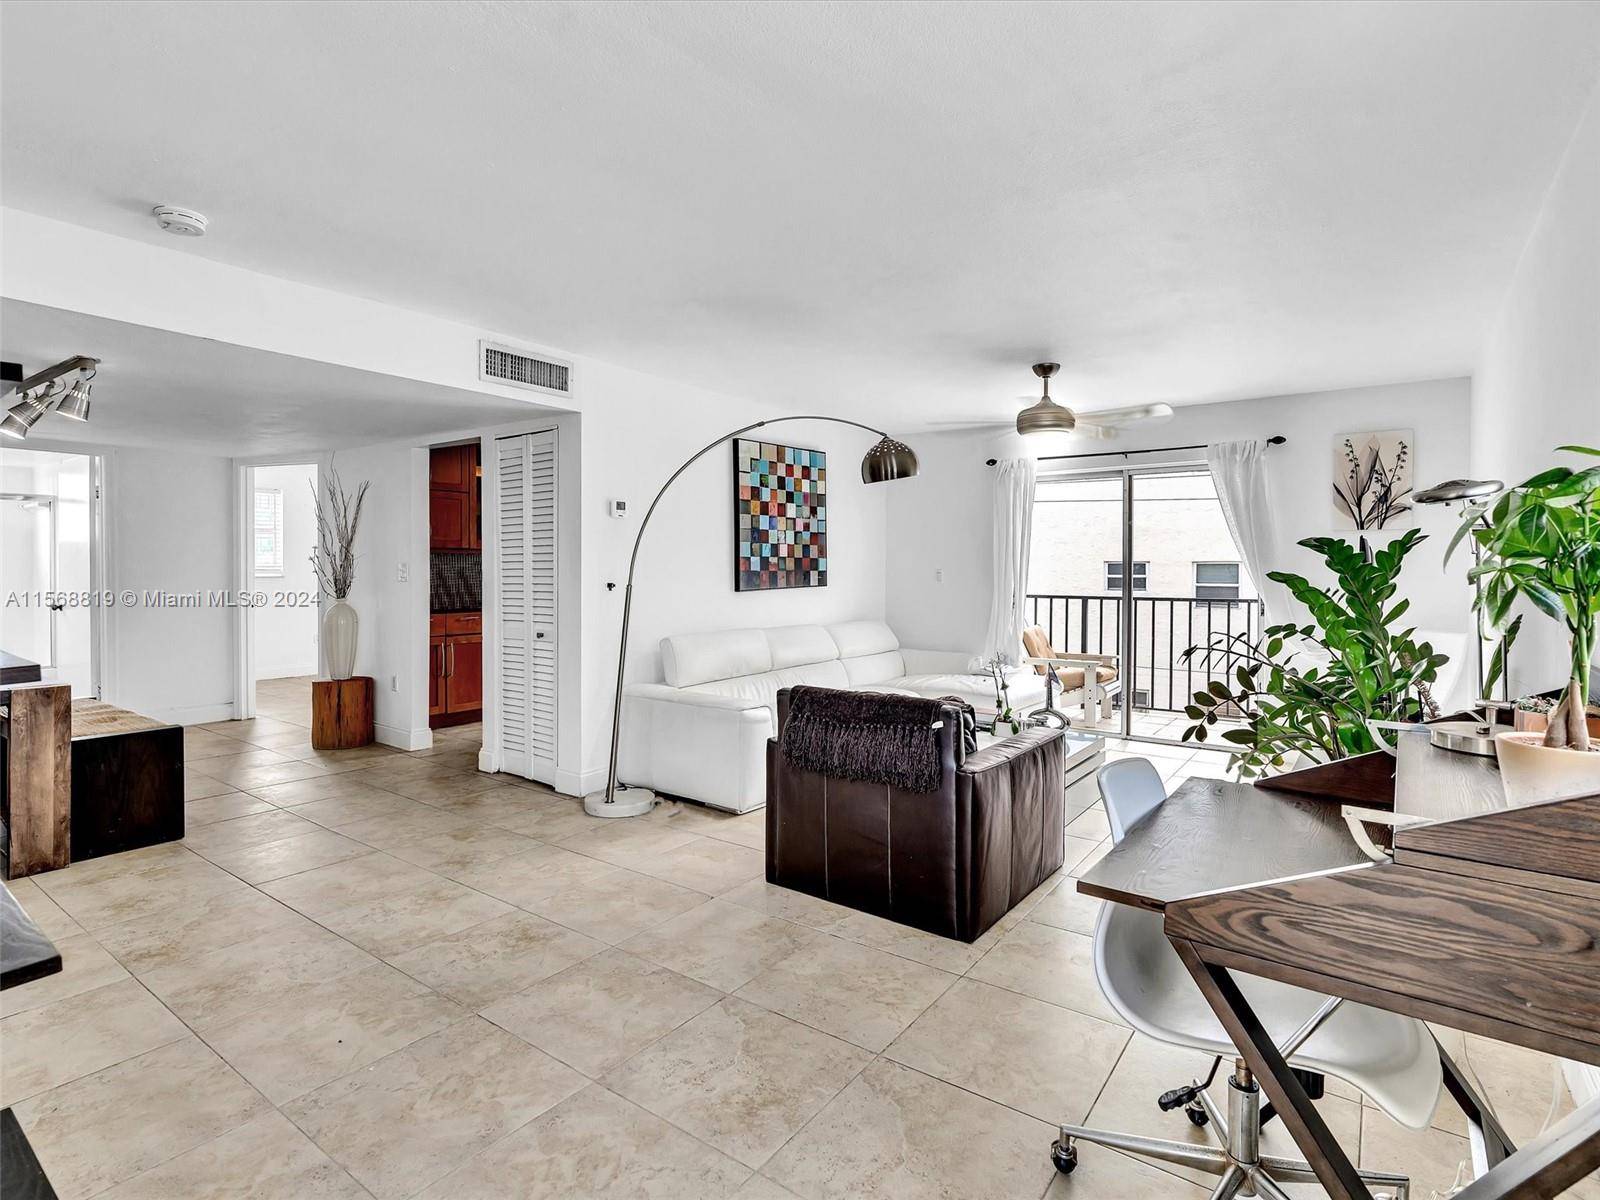 Cozy, spacious, updated charming 2 bedroom 2 bathroom unit in the heart of South Beach.